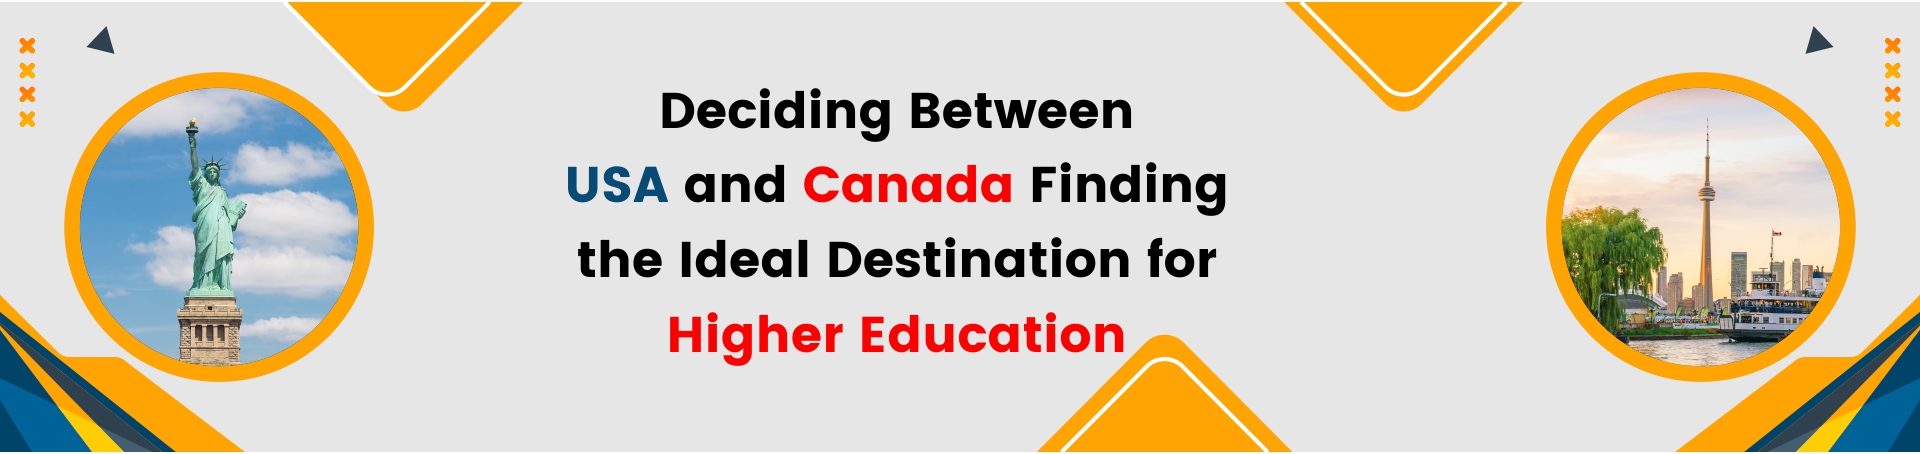 Deciding Between USA and Canada: Finding the Ideal Destination for Higher Education